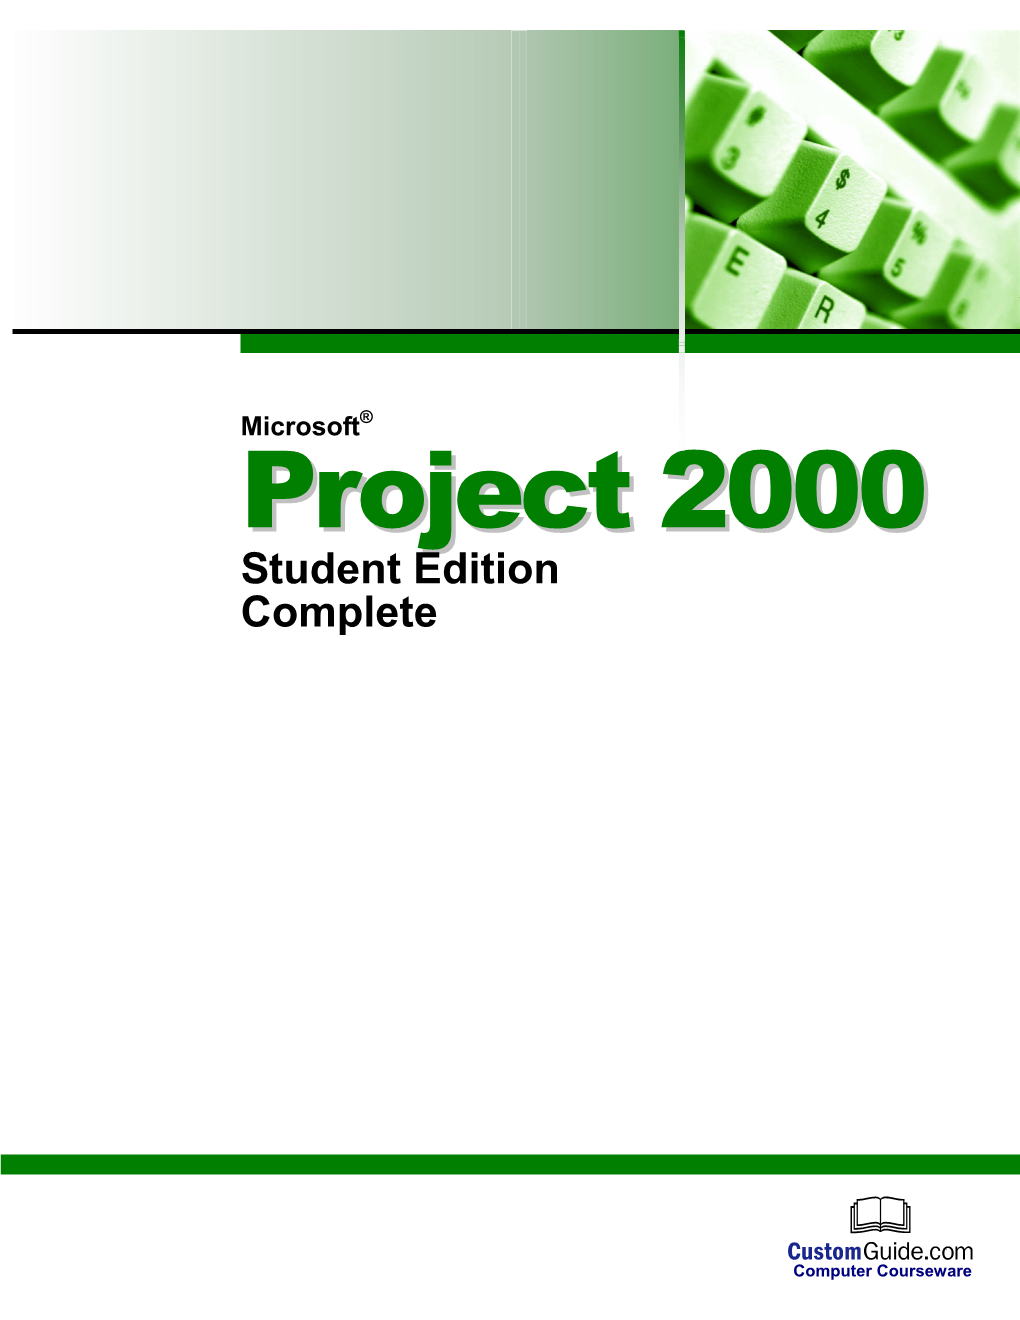 Project 2000 Database?